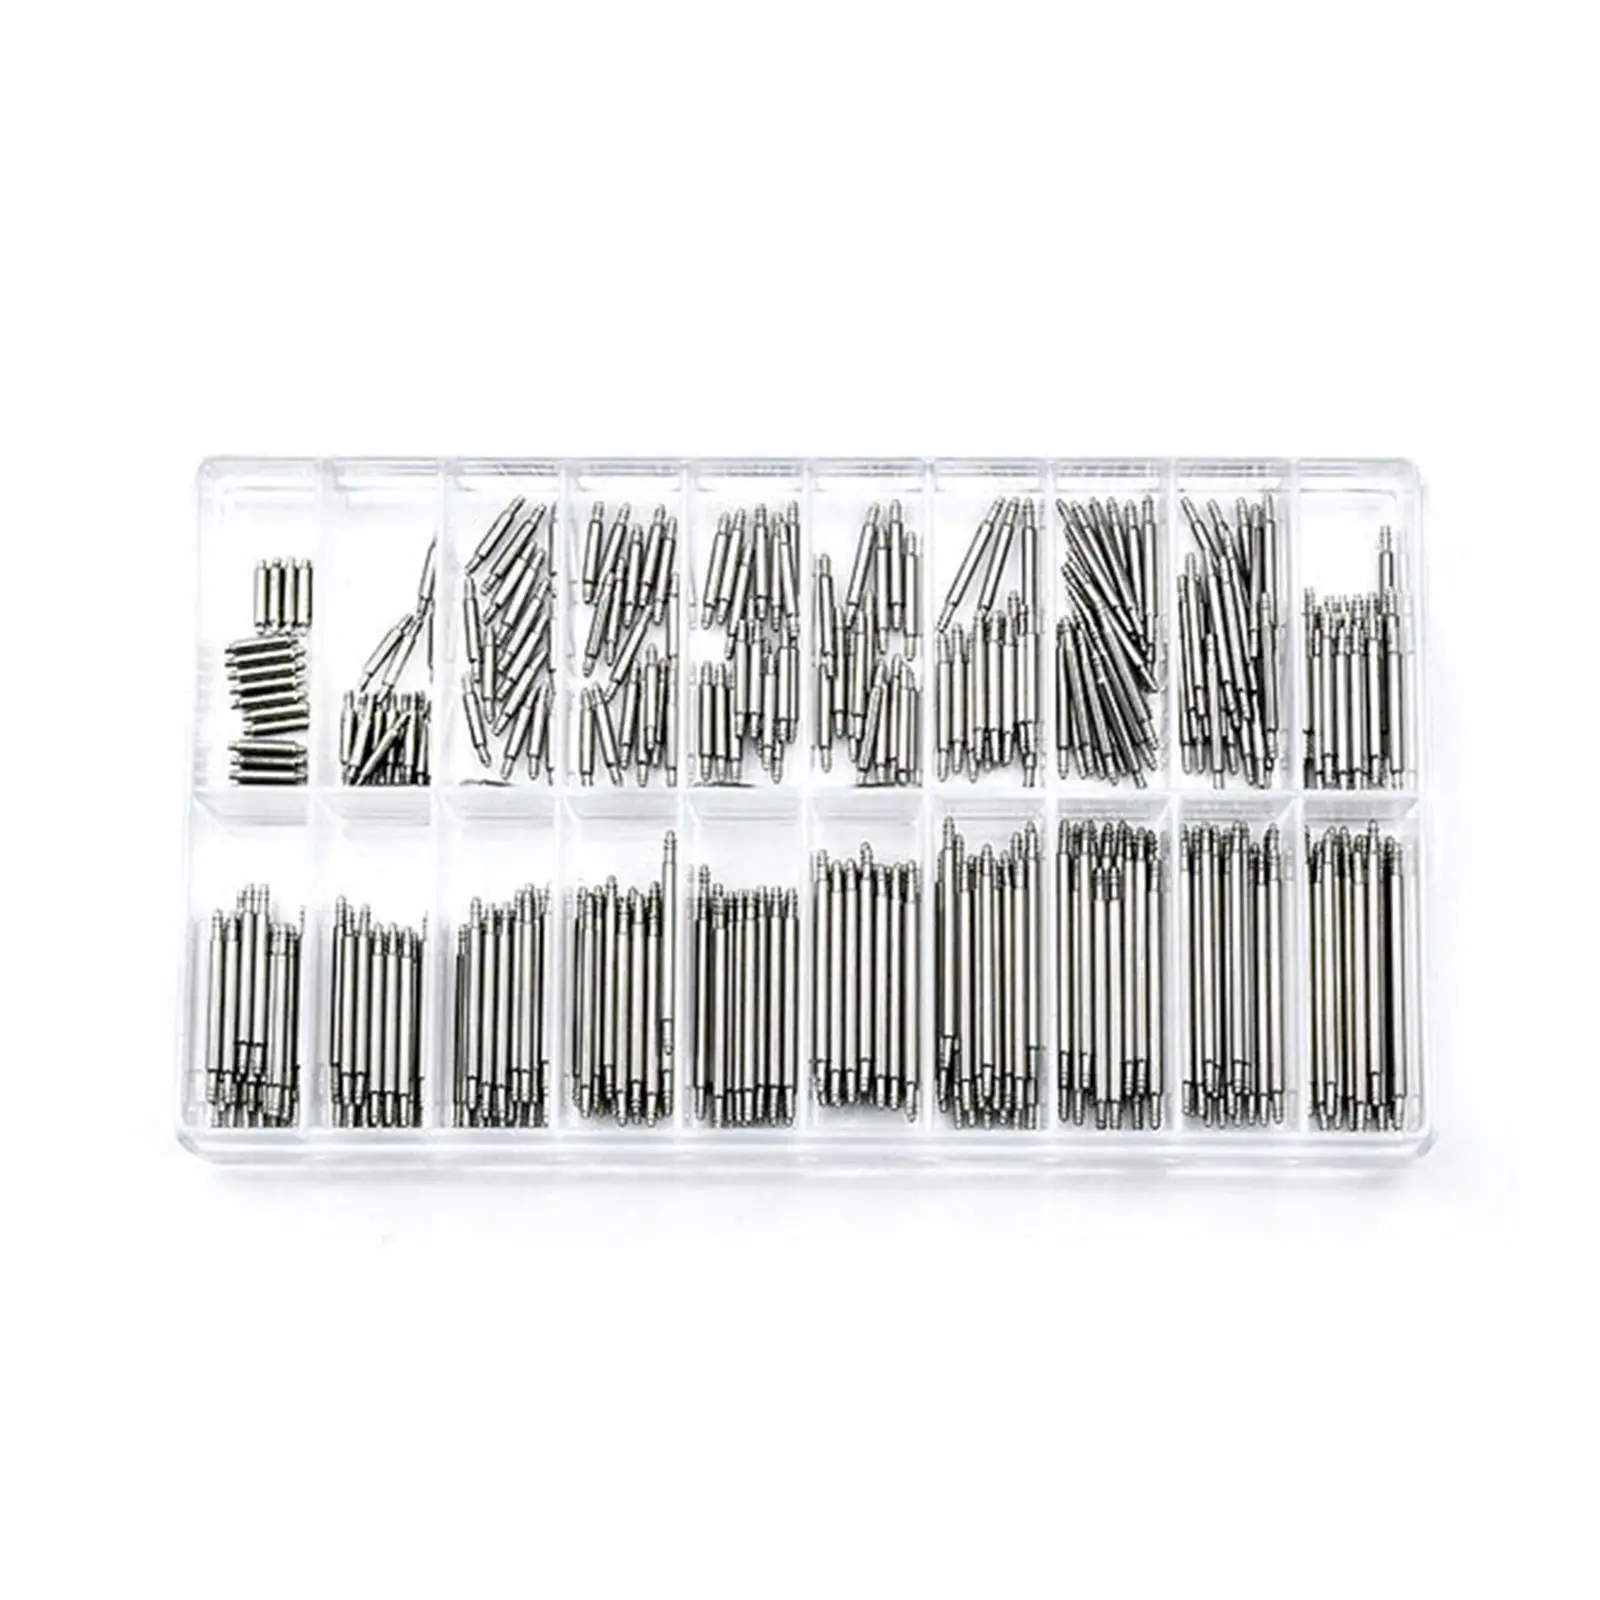 

400Pcs Spring Bars 6Mm-25mm for Repair Different Sizes Cotter Pins